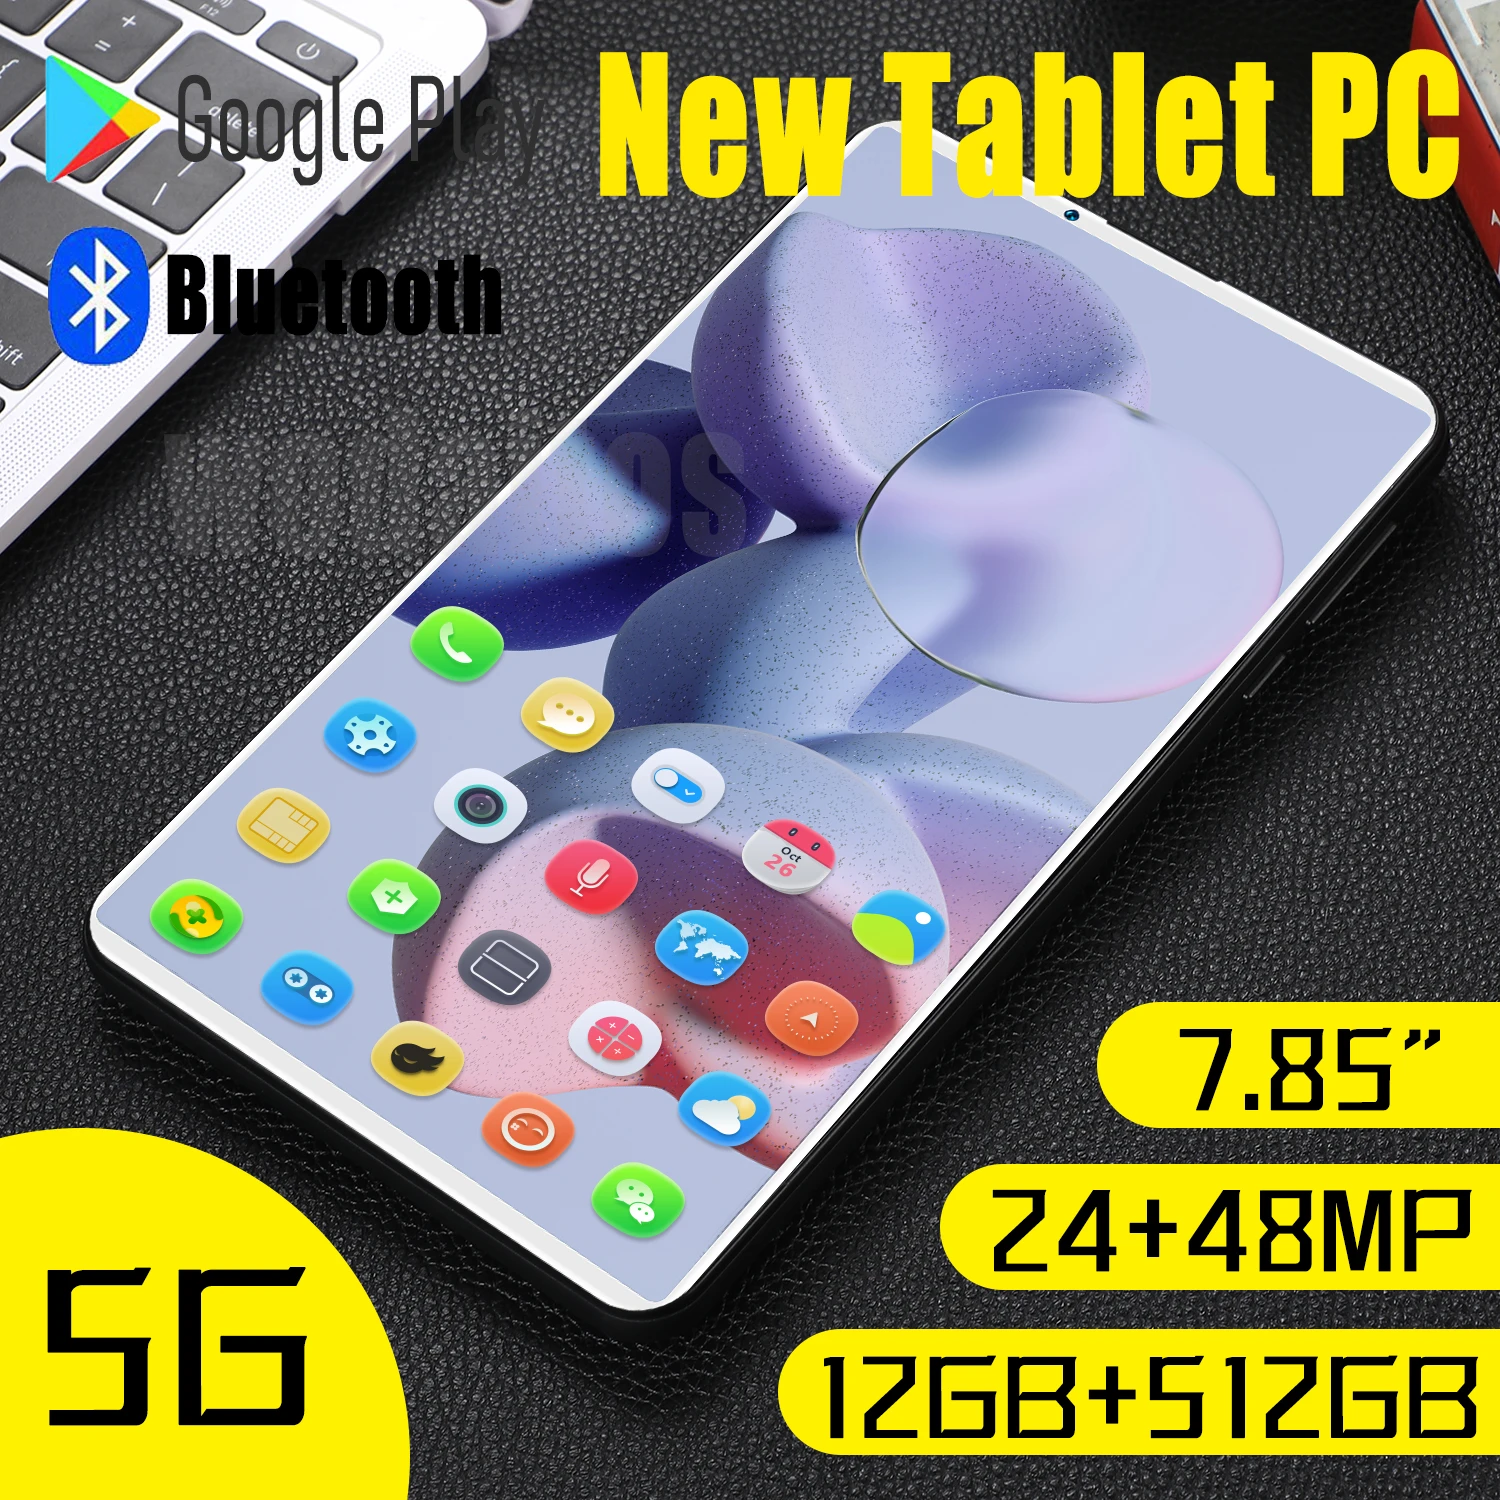 the newest tablet Mini Pc 7.85 Inch Laptop Global Version Cheap and Good Tablet Android12 12GB RAM 512GB ROM Netbook Pad Mini Air Dual SIM TF Card latest ipad